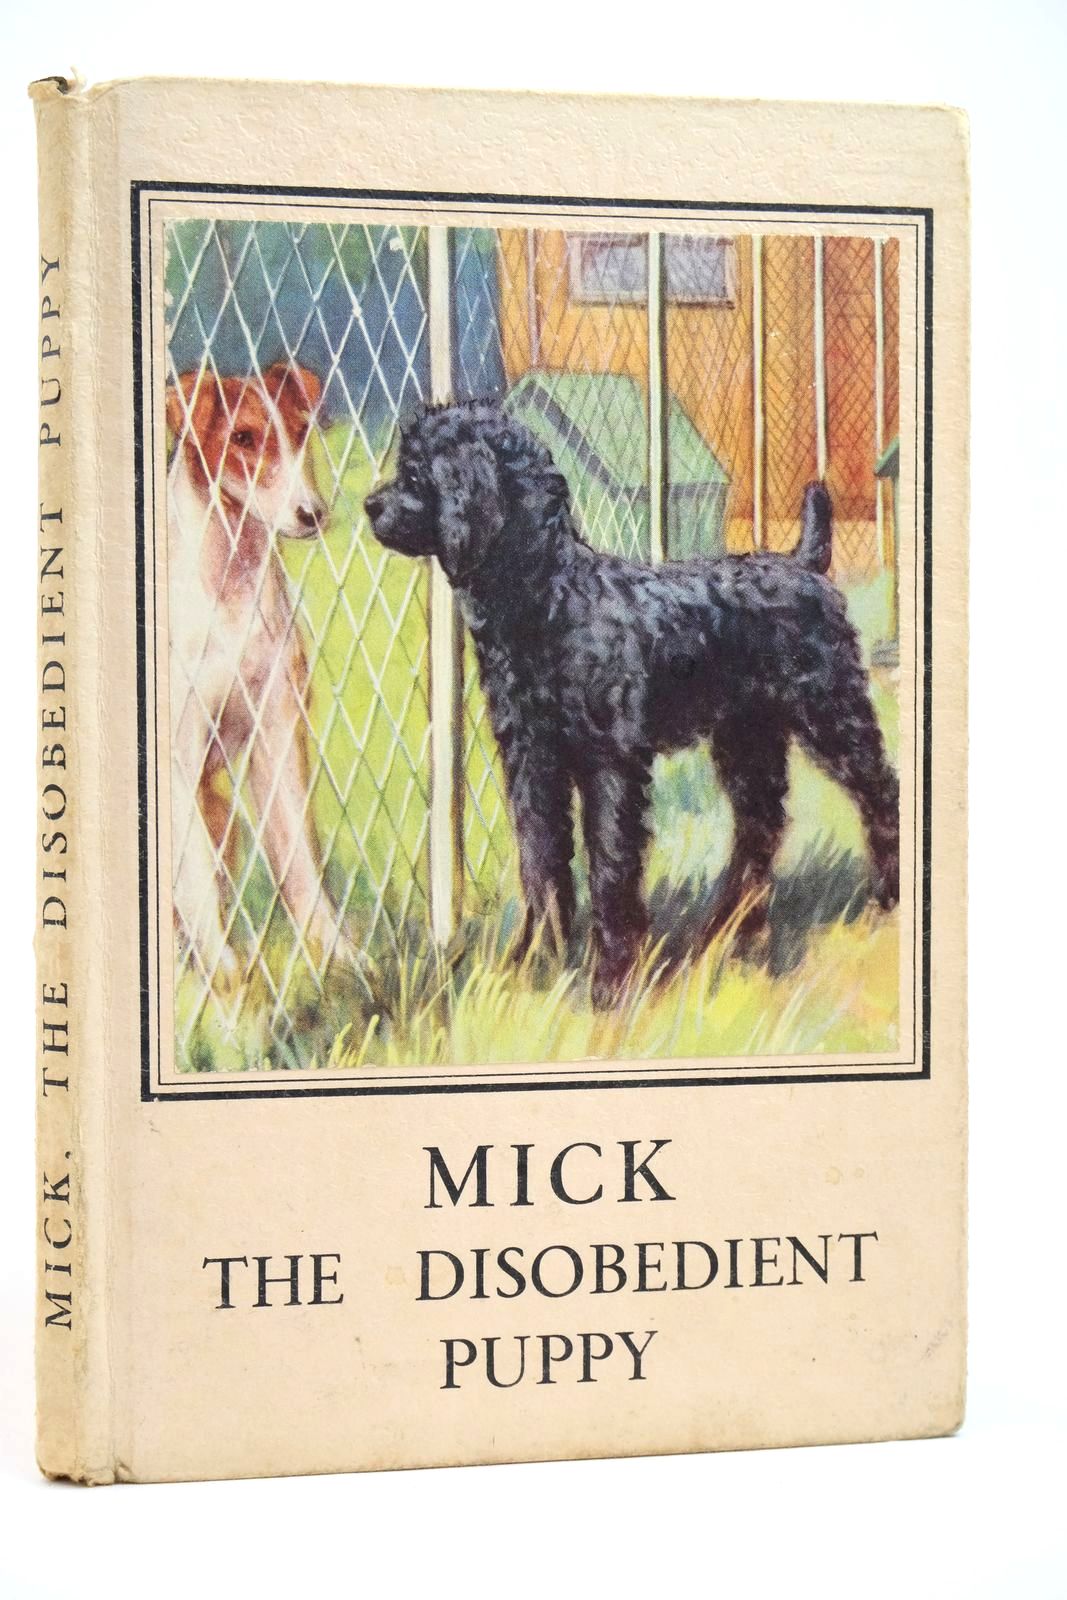 Photo of MICK THE DISOBEDIENT PUPPY written by Barr, Noel illustrated by Hickling, P.B. published by Wills &amp; Hepworth Ltd. (STOCK CODE: 2135156)  for sale by Stella & Rose's Books